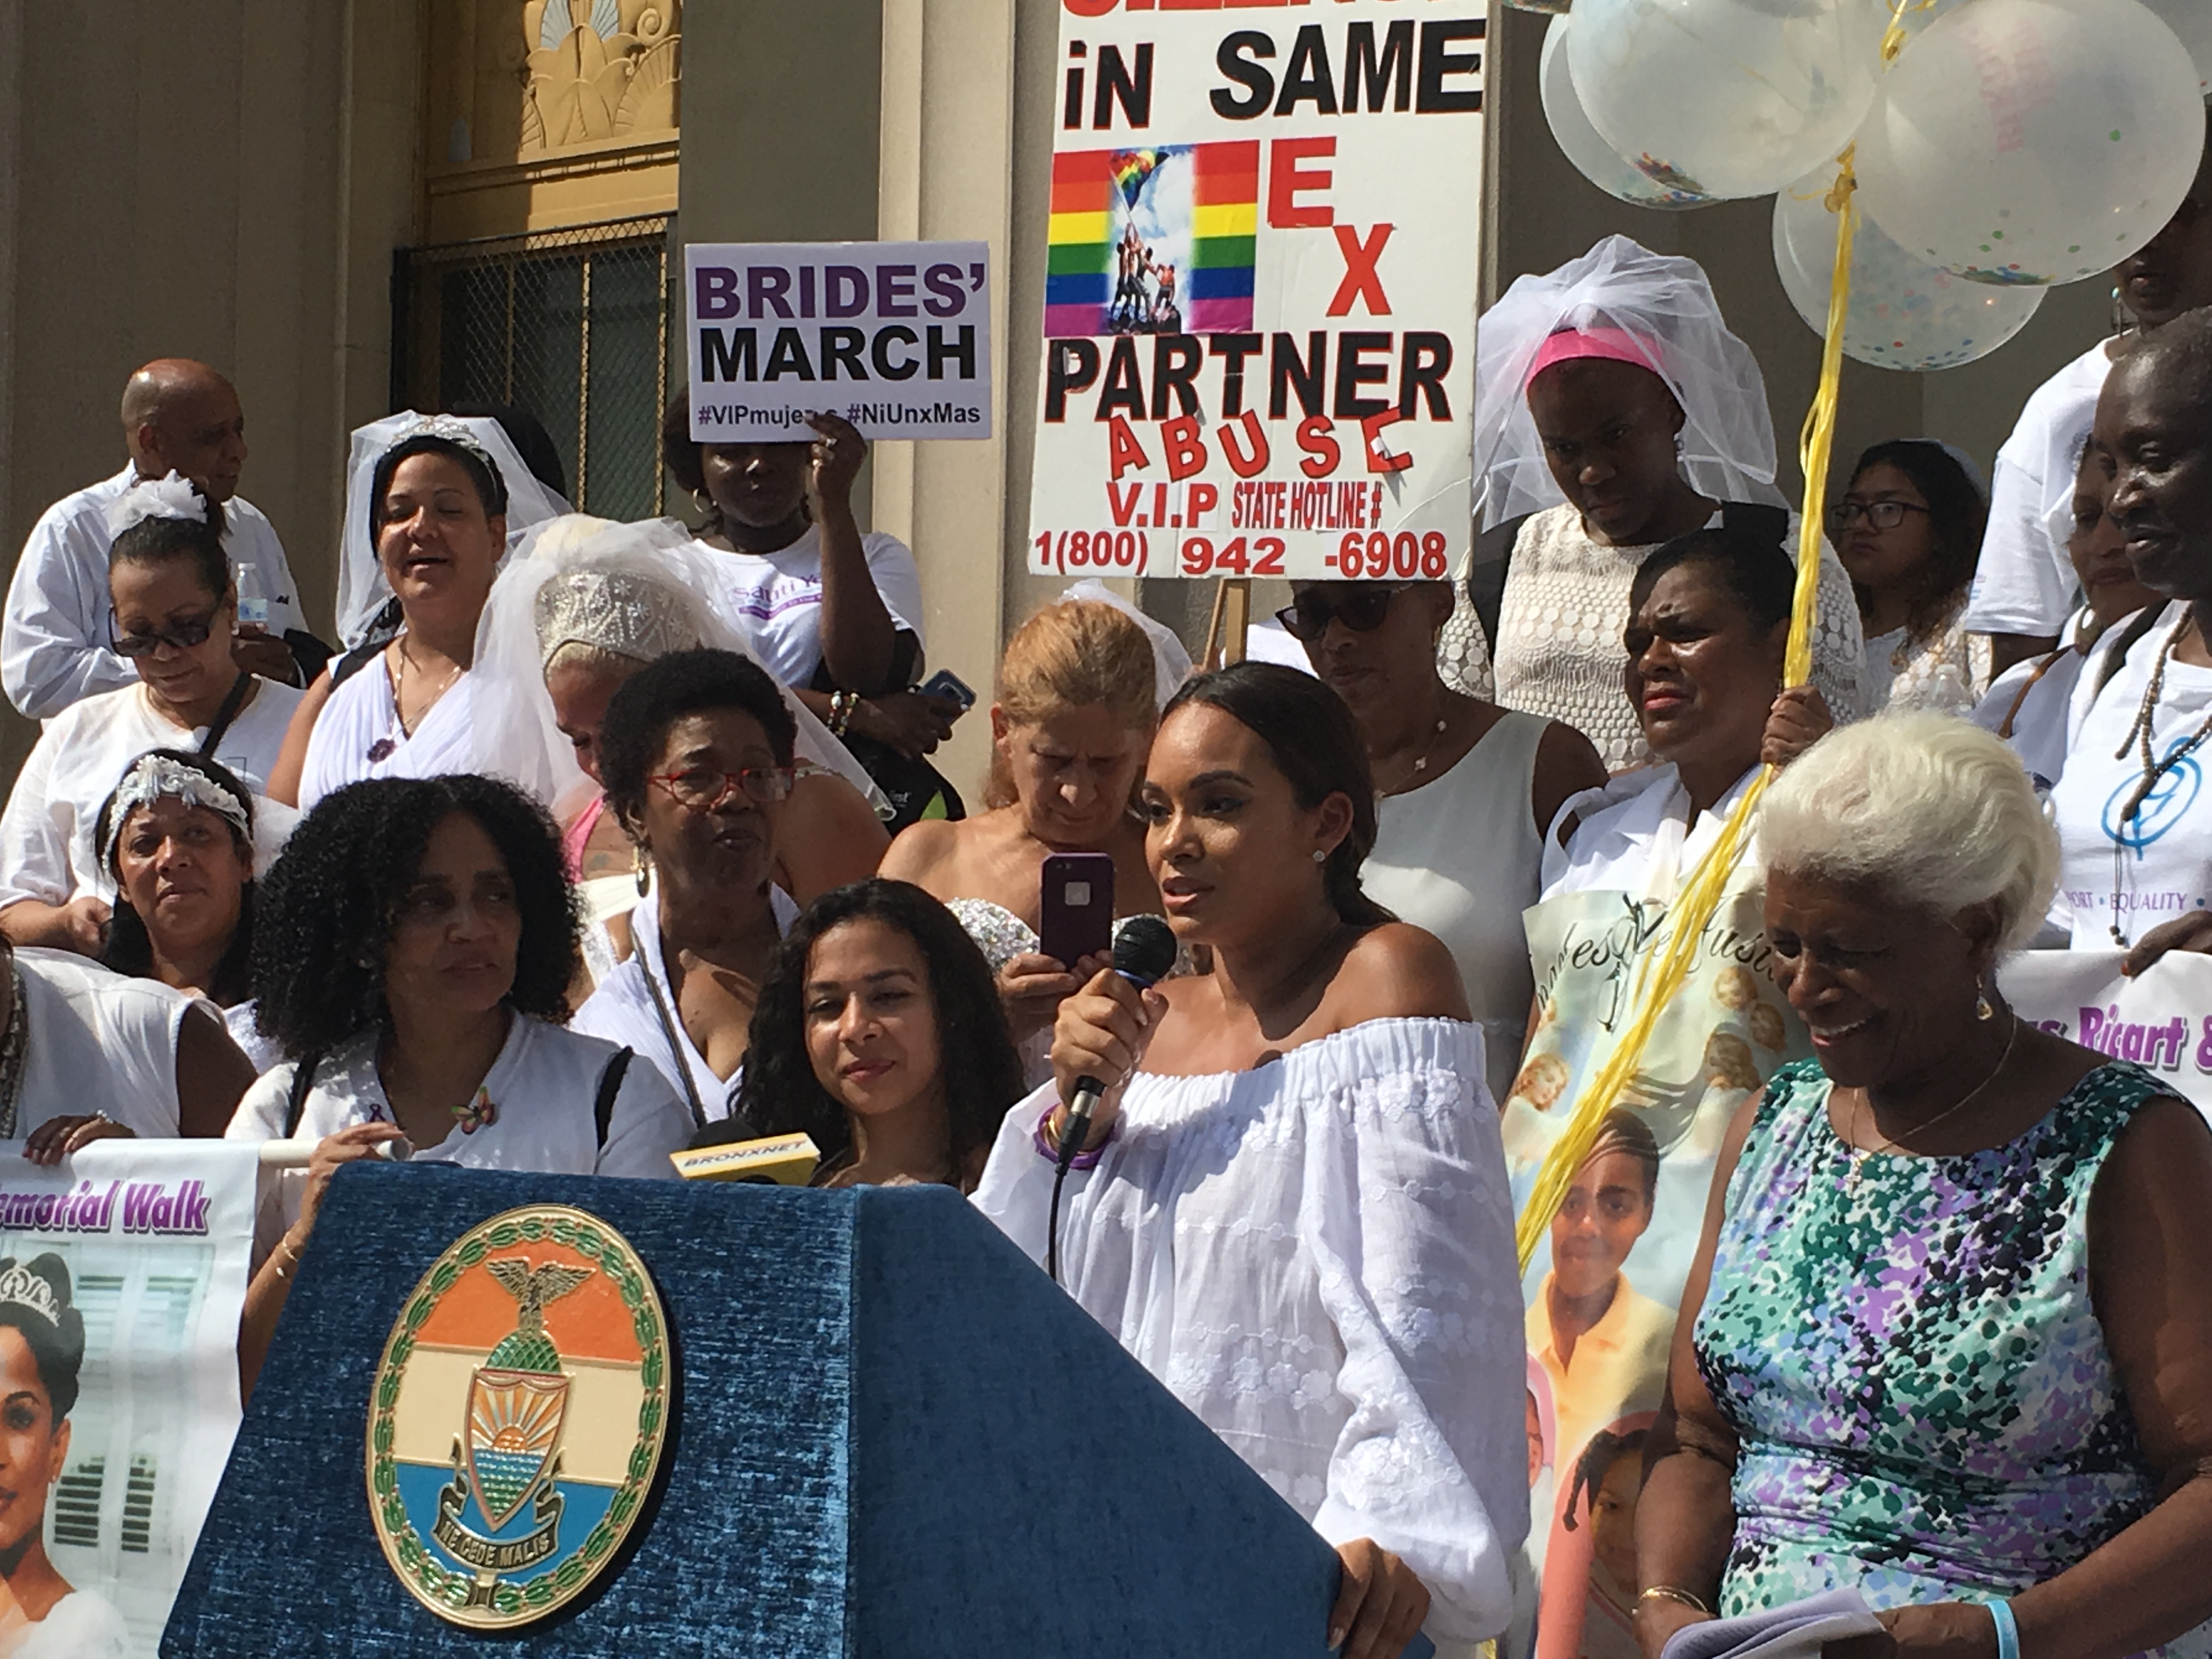 Basketball Wives” Evelyn Lozada Leads NYC March Against Domestic Violence